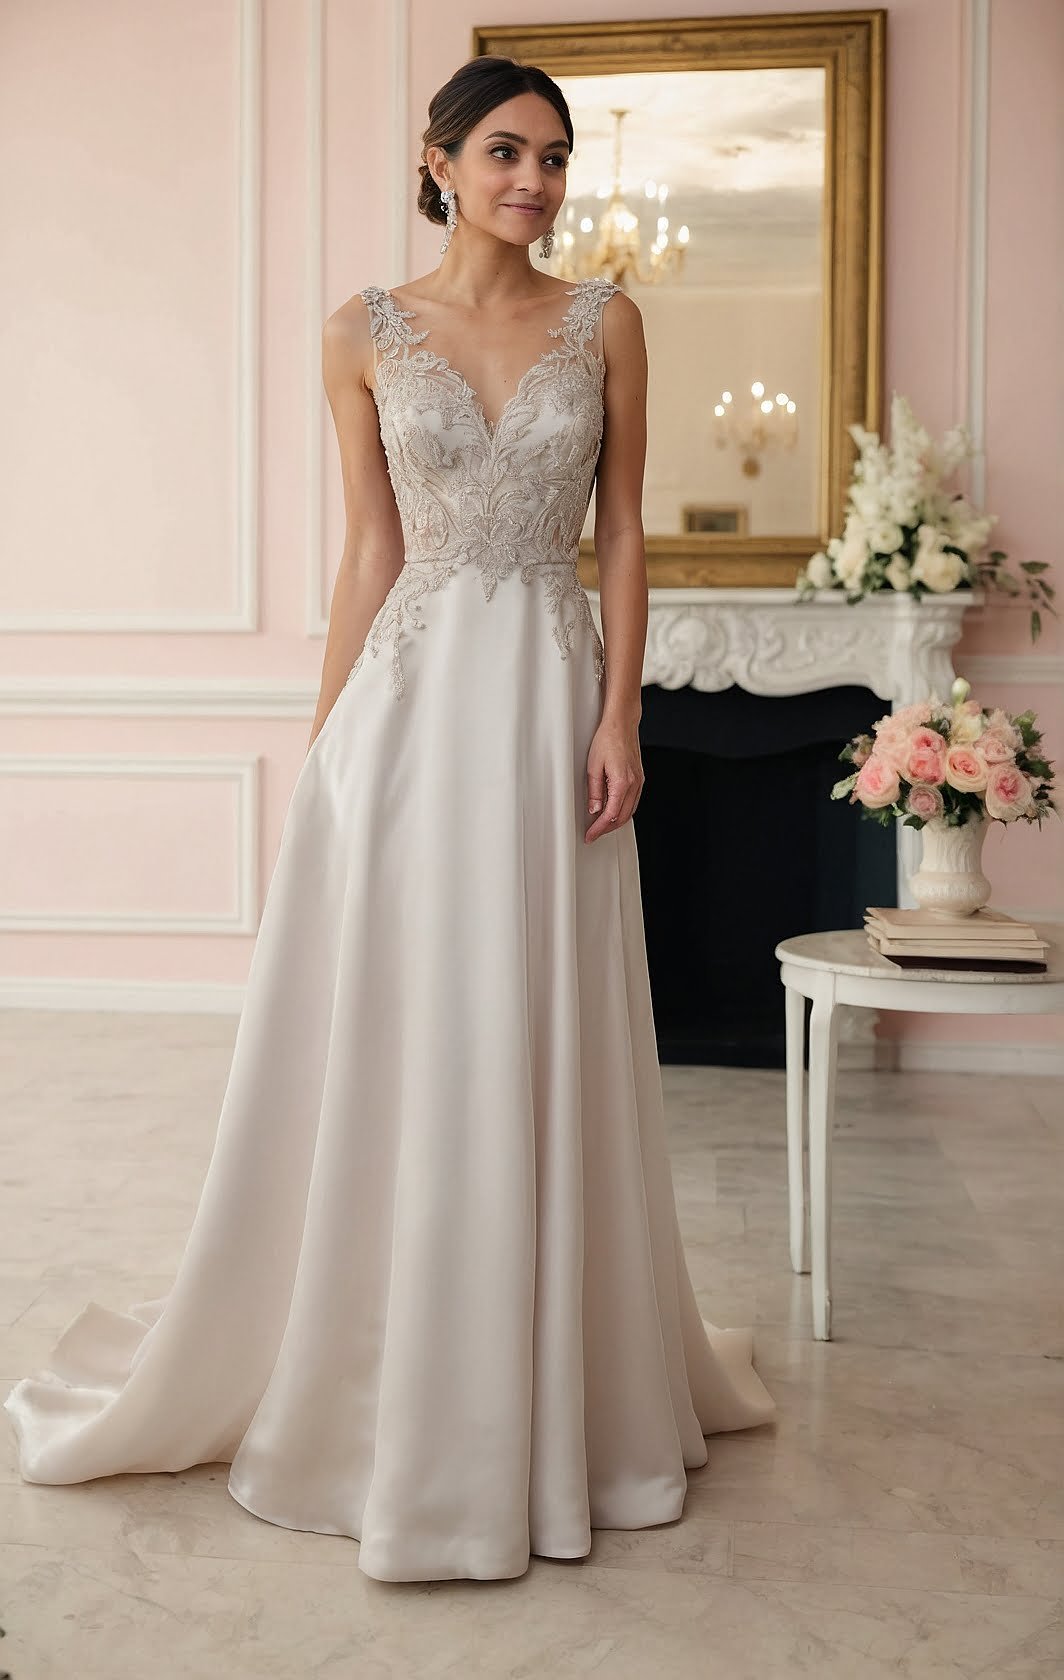 Elegant Ivory A-Line Gown with Lace Bodice and Flowing Satin Skirt